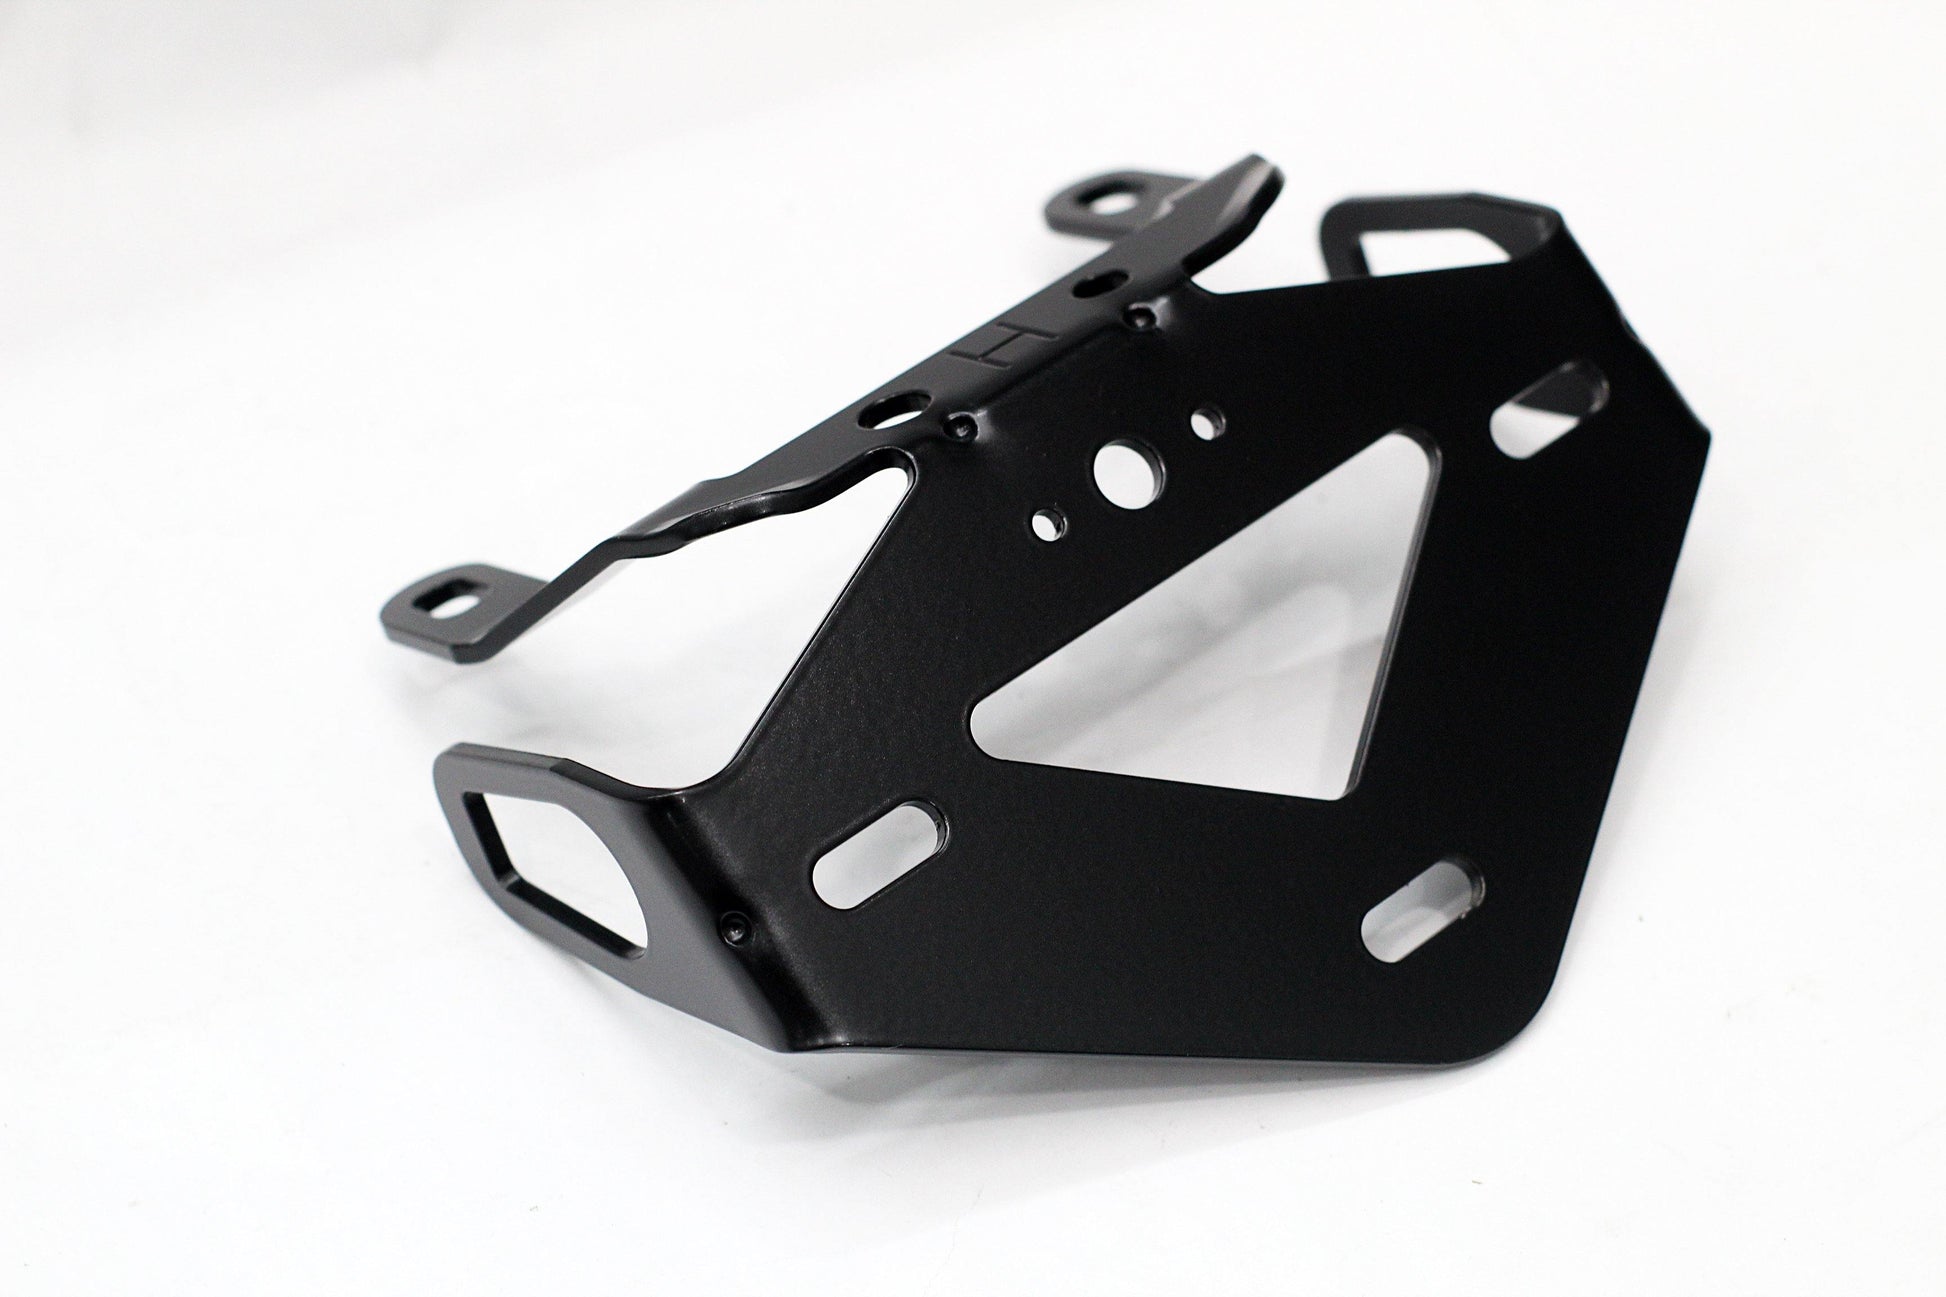 R&G Tail Tidy fits for the Kawasaki Versys 650 ('10-'14) - Durian Bikers